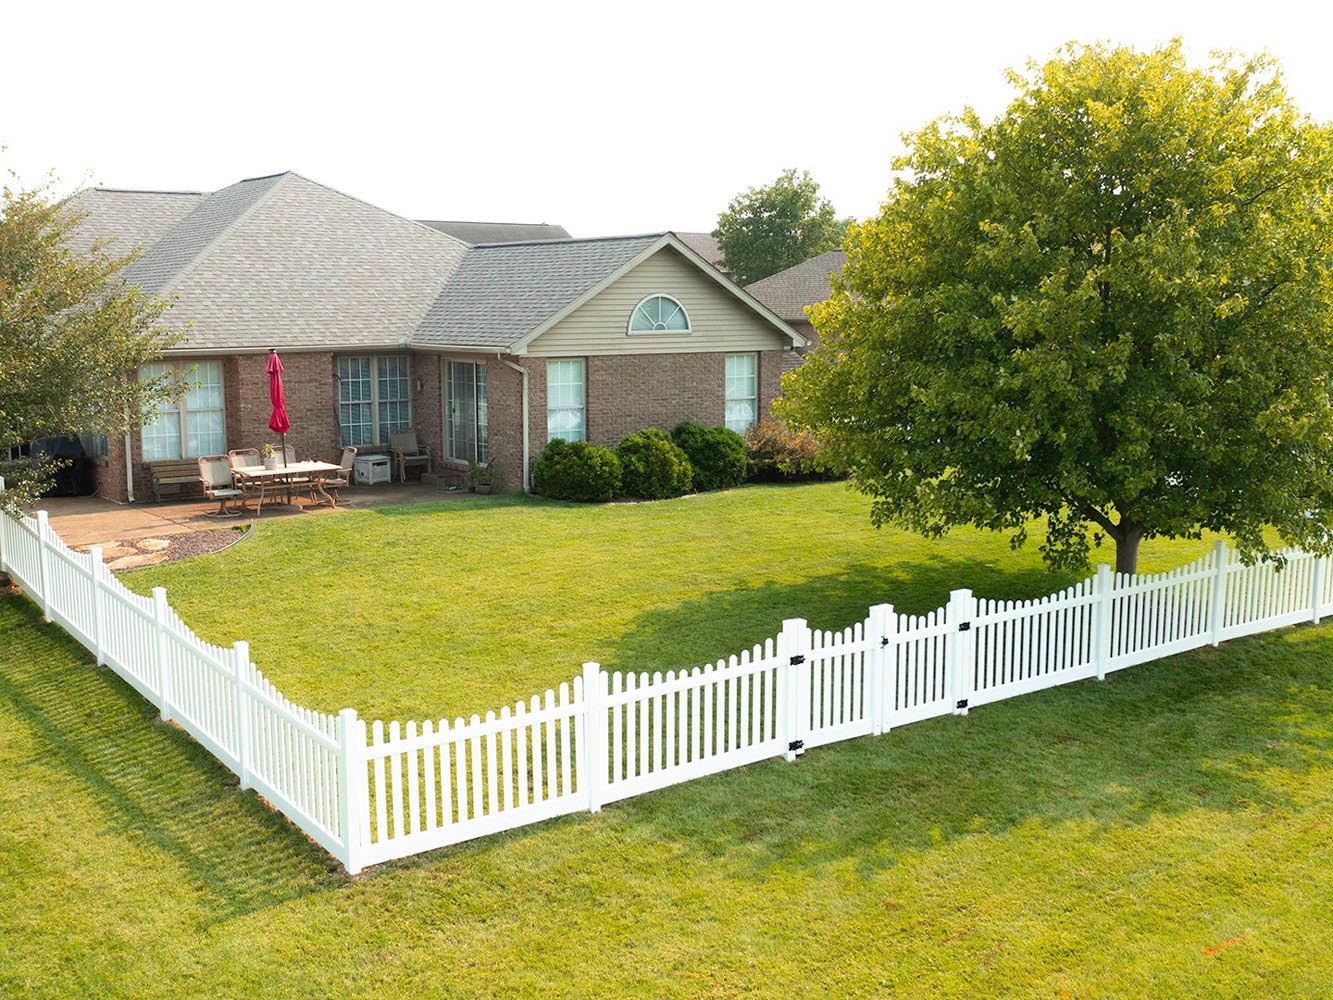 Richland Indiana residential and commercial fencing